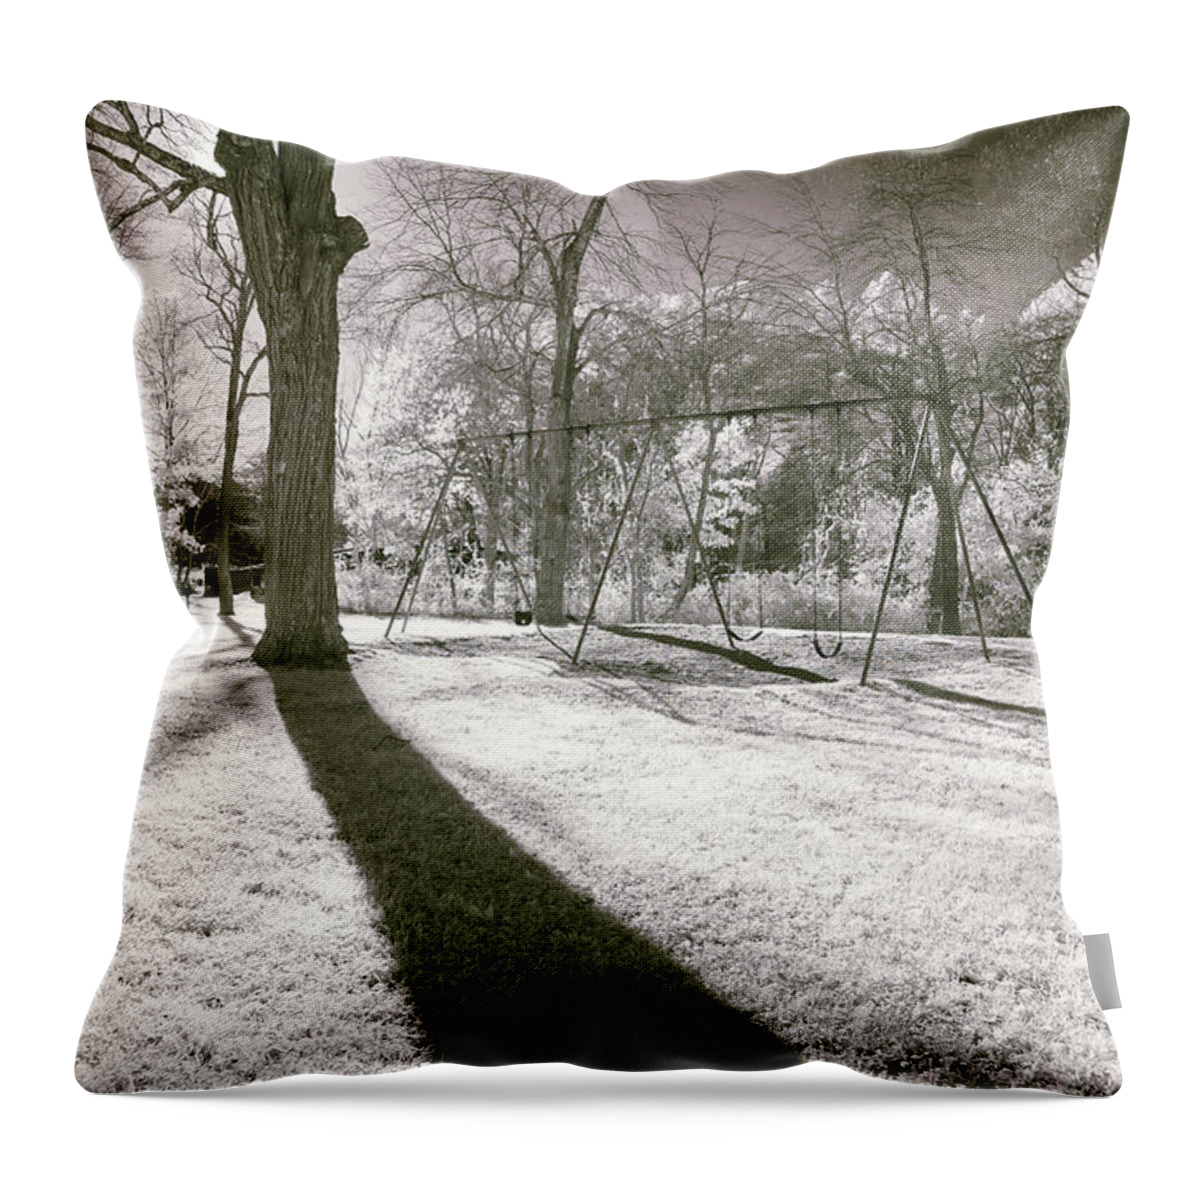 Shadow Shadows Swingset Swings Swing Set Play Ground Playground Park Public Outside Outdoors Nature Ir Infrared Infra Red Nanometer Brian Hale Brianhalephoto Hudson Ma Mass Massachusetts Sun Sky Trees Tree Throw Pillow featuring the photograph Shadow of a Memory by Brian Hale